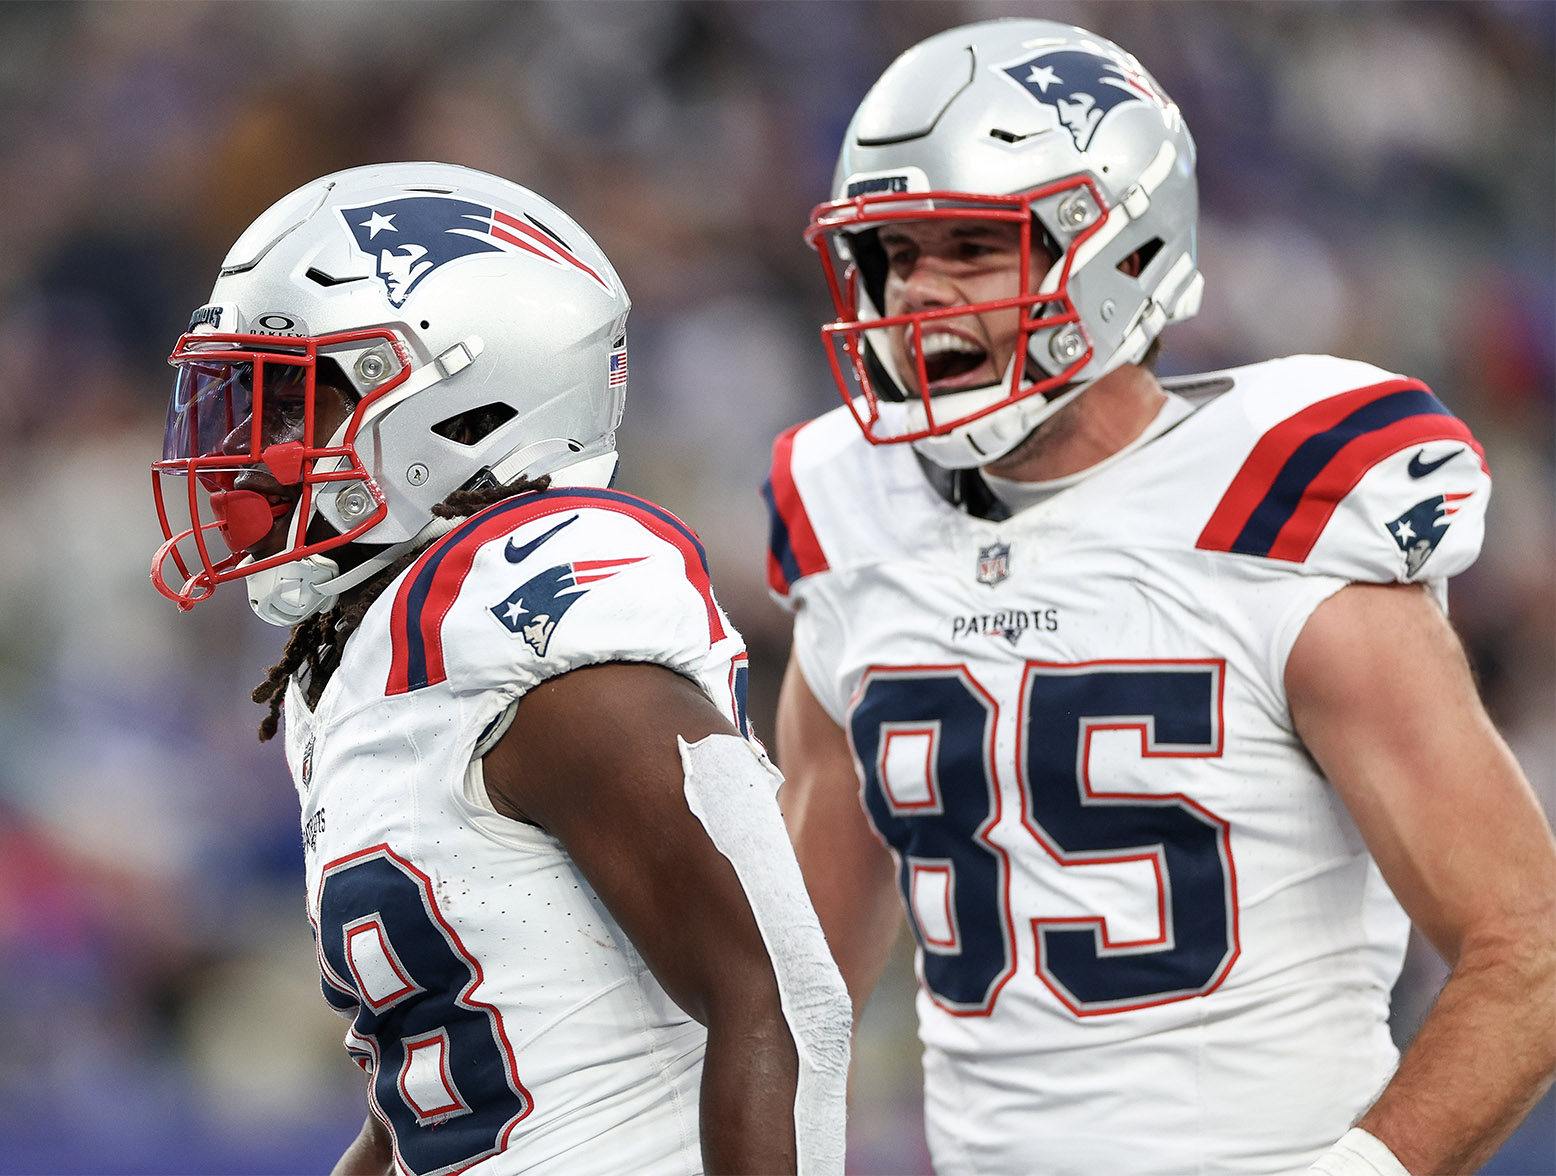 EAST RUTHERFORD, NEW JERSEY - NOVEMBER 26: Rhamondre Stevenson #38 of the New England Patriots and Hunter Henry #85 of the New England Patriots celebrates after Stevenson's rushing touchdown during the third quarter against the New York Giants at MetLife Stadium on November 26, 2023 in East Rutherford, New Jersey. (Photo by Elsa/Getty Images)